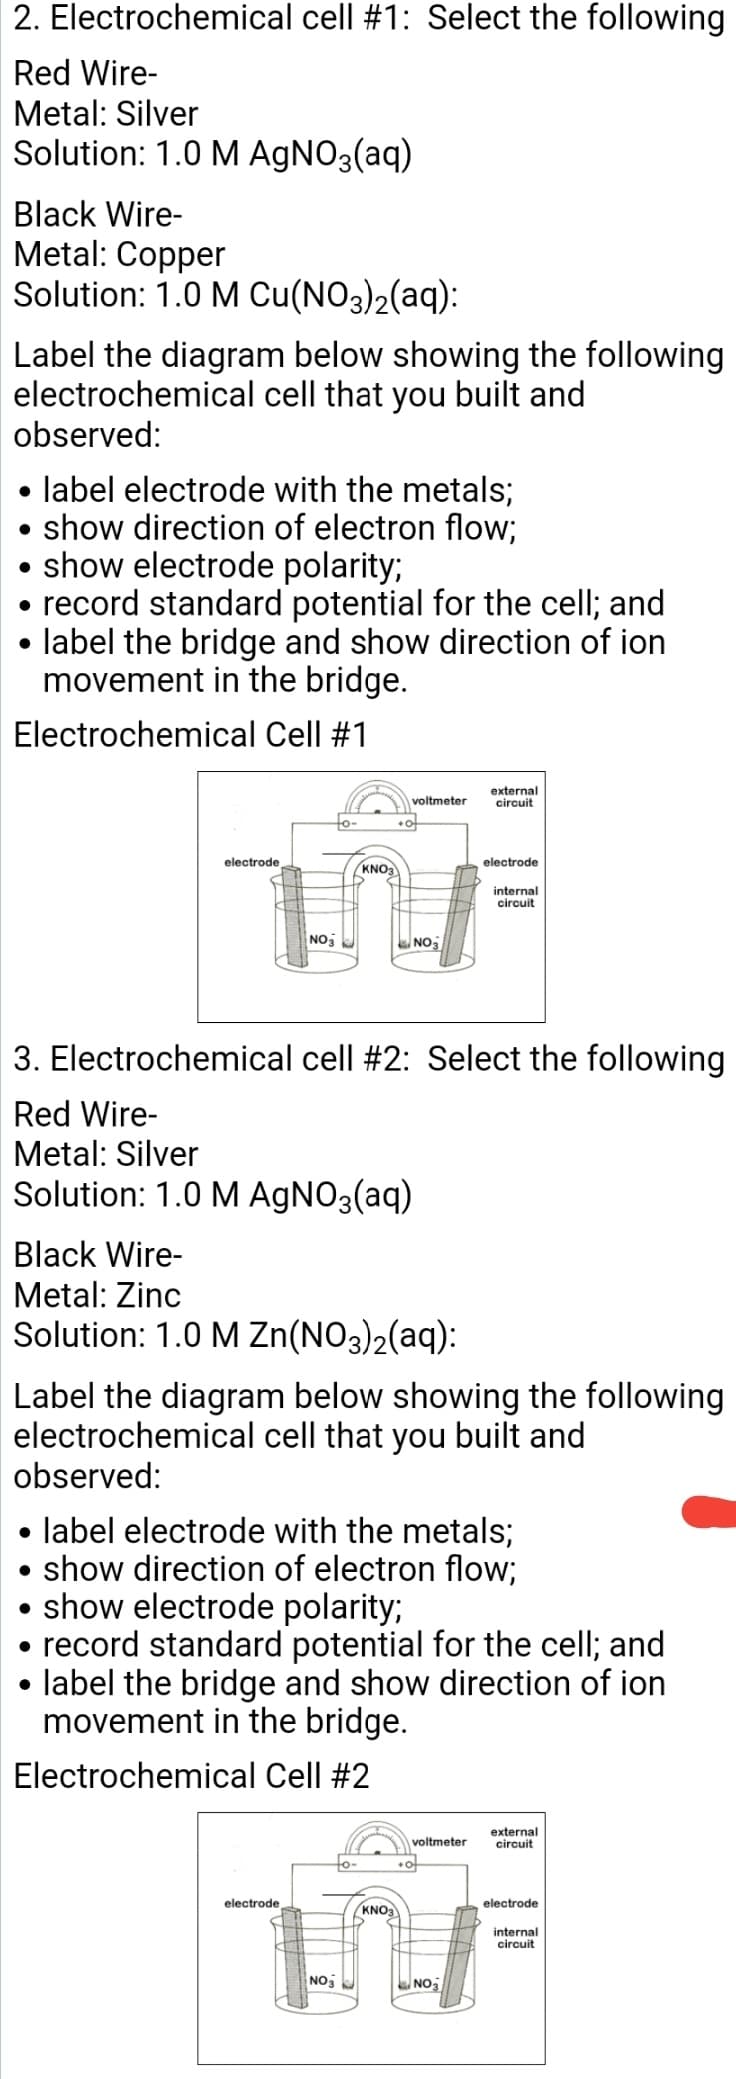 2. Electrochemical cell #1: Select the following
Red Wire-
Metal: Silver
Solution: 1.0 M AGNO3(aq)
Black Wire-
Metal: Copper
Solution: 1.0 M Cu(NO3)2(aq):
Label the diagram below showing the following
electrochemical cell that you built and
observed:
• label electrode with the metals;
show direction of electron flow;
show electrode polarity;
• record standard potential for the cell; and
label the bridge and show direction of ion
movement in the bridge.
Electrochemical Cell #1
external
circuit
voltmeter
electrode
electrode
KNO3
internal
circuit
NO
NO3
3. Electrochemical cell #2: Select the following
Red Wire-
Metal: Silver
Solution: 1.0 M AGNO3(aq)
Black Wire-
Metal: Zinc
Solution: 1.0 M Zn(NO3)2(aq):
Label the diagram below showing the following
electrochemical cell that you built and
observed:
label electrode with the metals;
• show direction of electron flow;
show electrode polarity;
record standard potential for the cell; and
label the bridge and show direction of ion
movement in the bridge.
Electrochemical Cell #2
external
circuit
voltmeter
electrode
electrode
KNO3
internal
circuit
NO
NO
